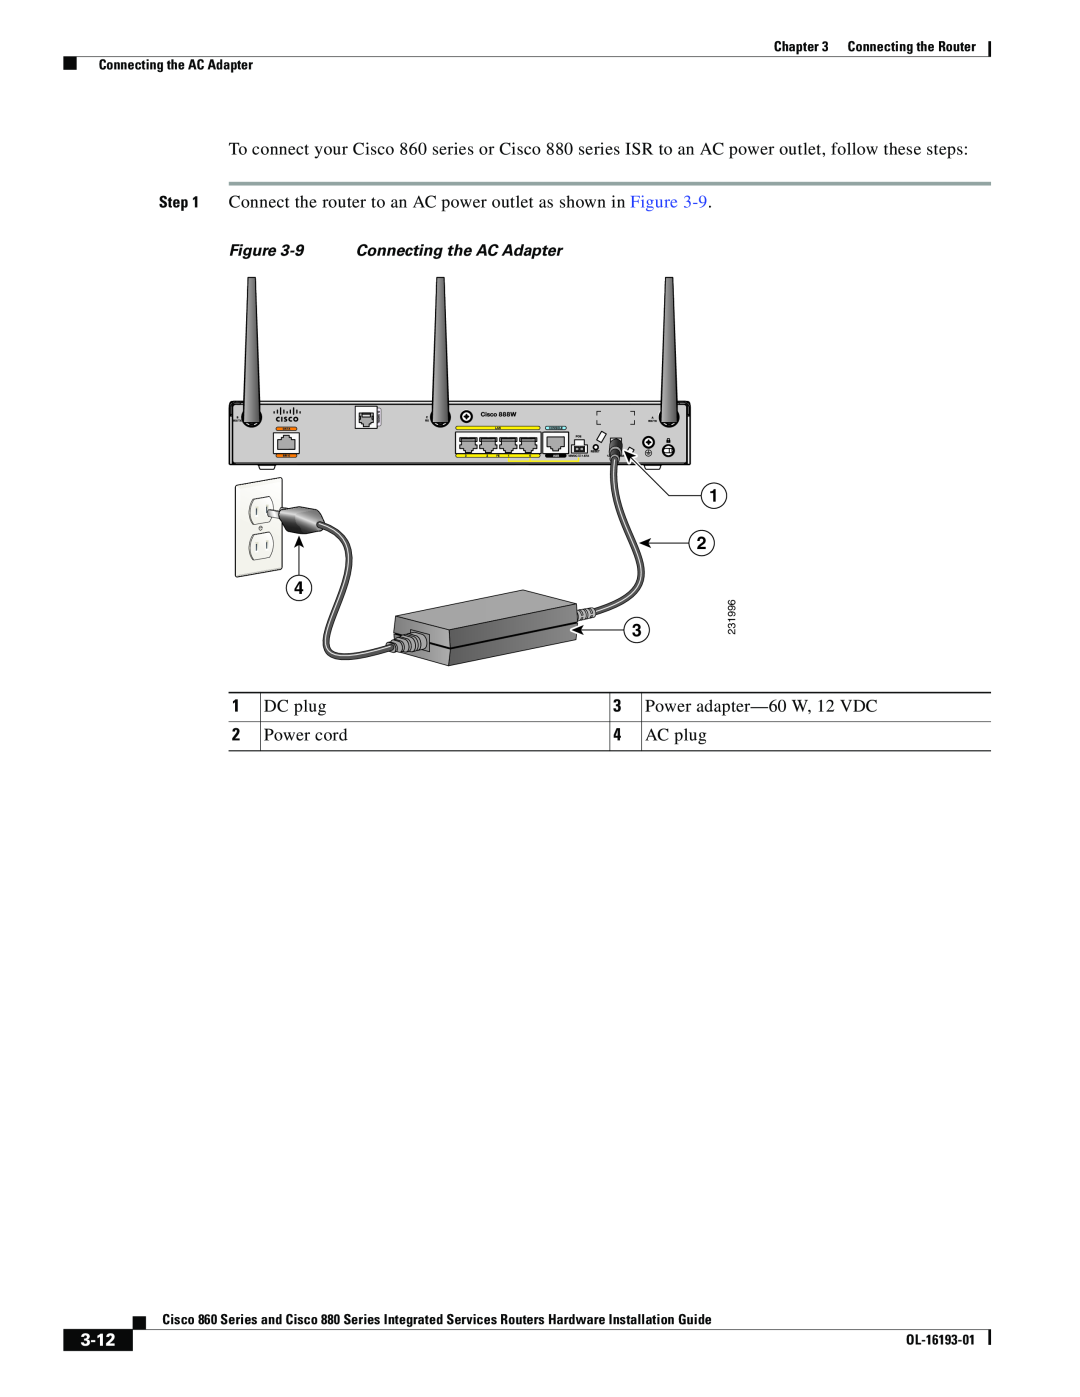 Cisco Systems HIG880, C892FSPK9, 861WGNPK9RF, 860 manual 3-12, 9 Connecting the AC Adapter 